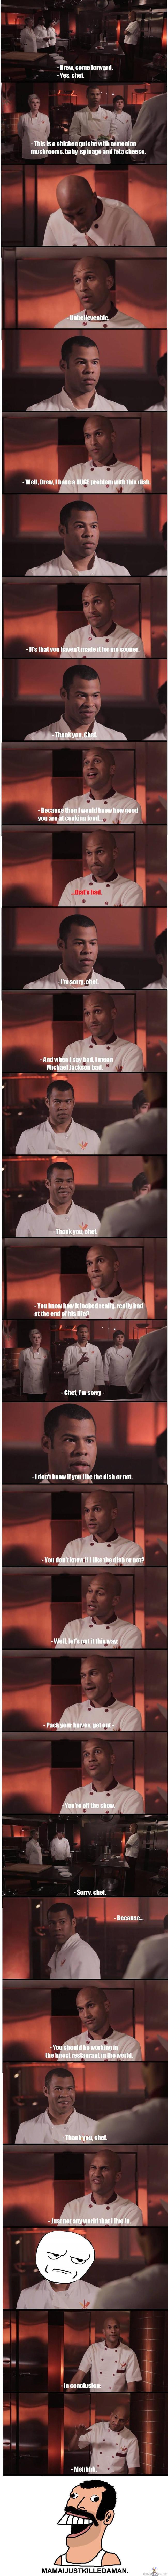 Masterchef - Trolling to the max